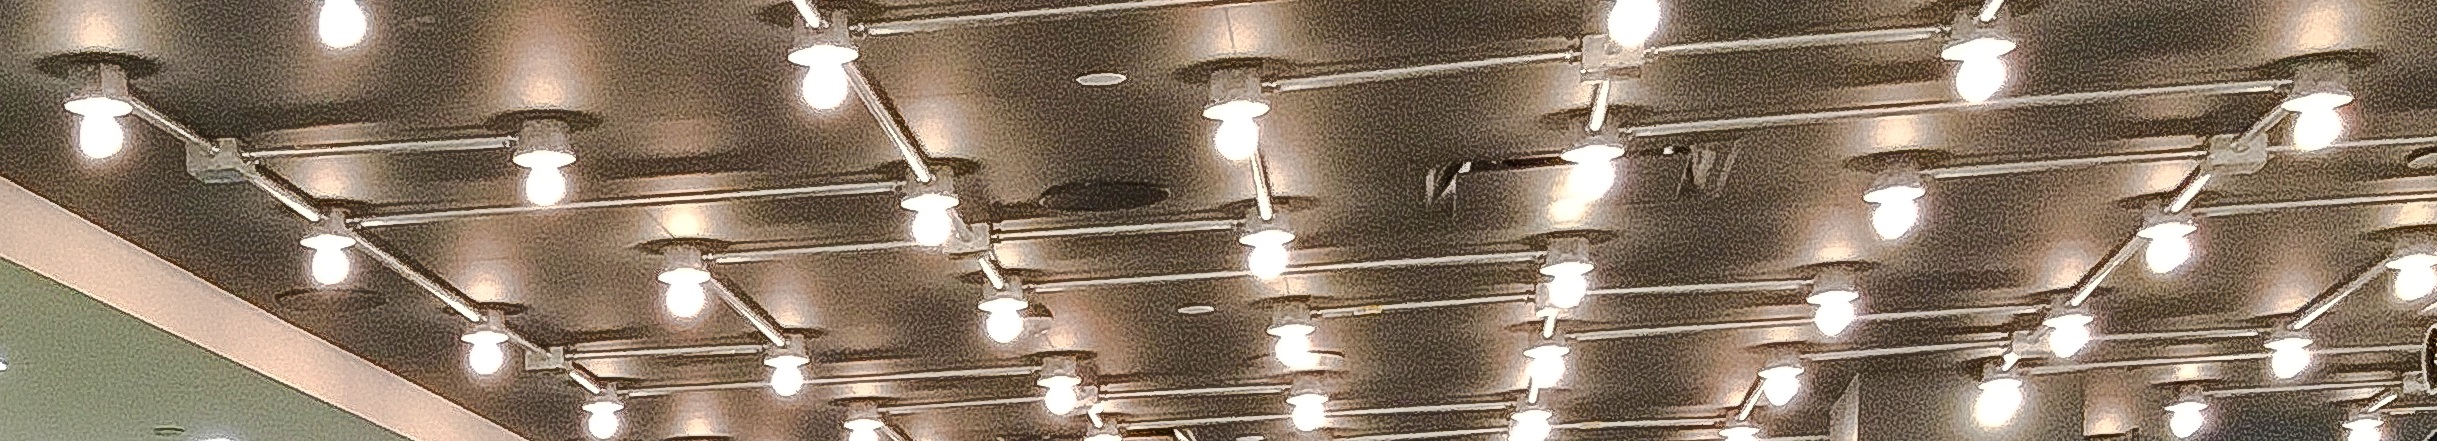 Do You Know What Your Light Fixtures Are Capable Of?